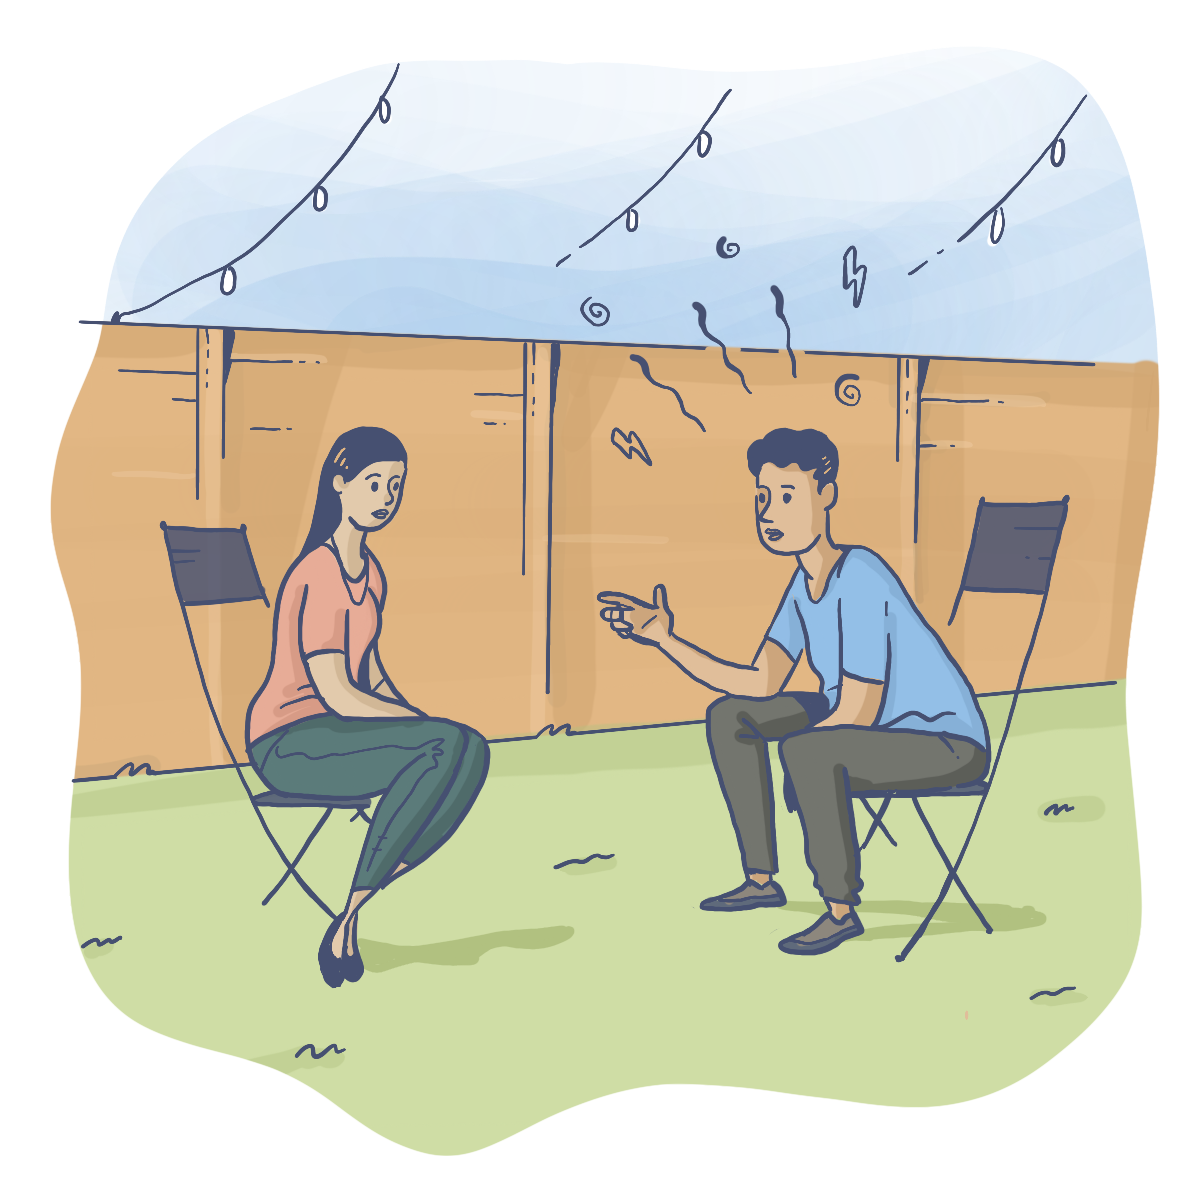 Correctional officer mental health course image - man chatting with woman outside at a party